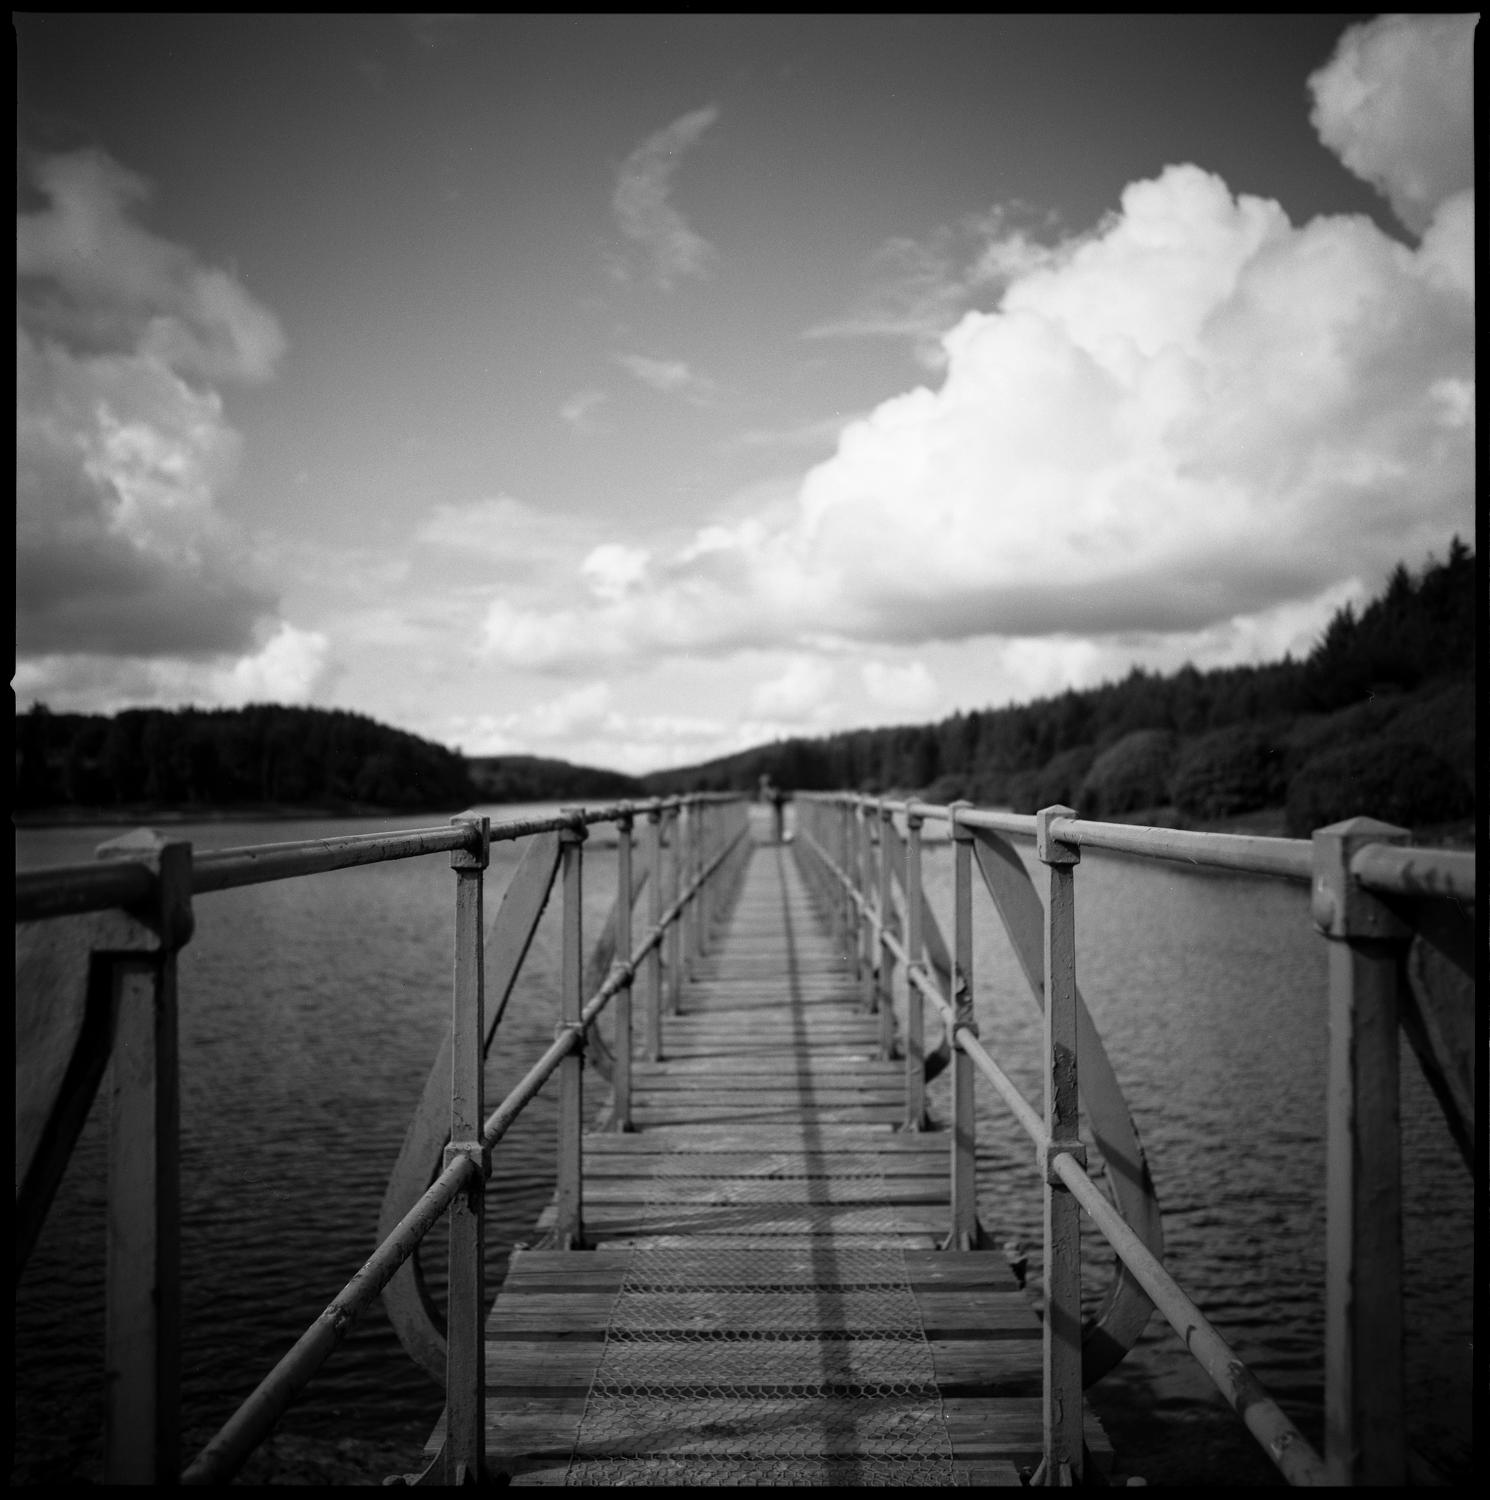 Edition 1/10 - Kennick Reservoir, Devon, Silver Gelatin Photograph

Edition of 10 + 5 APs.
Front: Signature and edition number with artists blind stamp.  
Back: Ink stamp and print details.

Mounted: 50 x 50 cm (20 x 20 inches approx) Including a